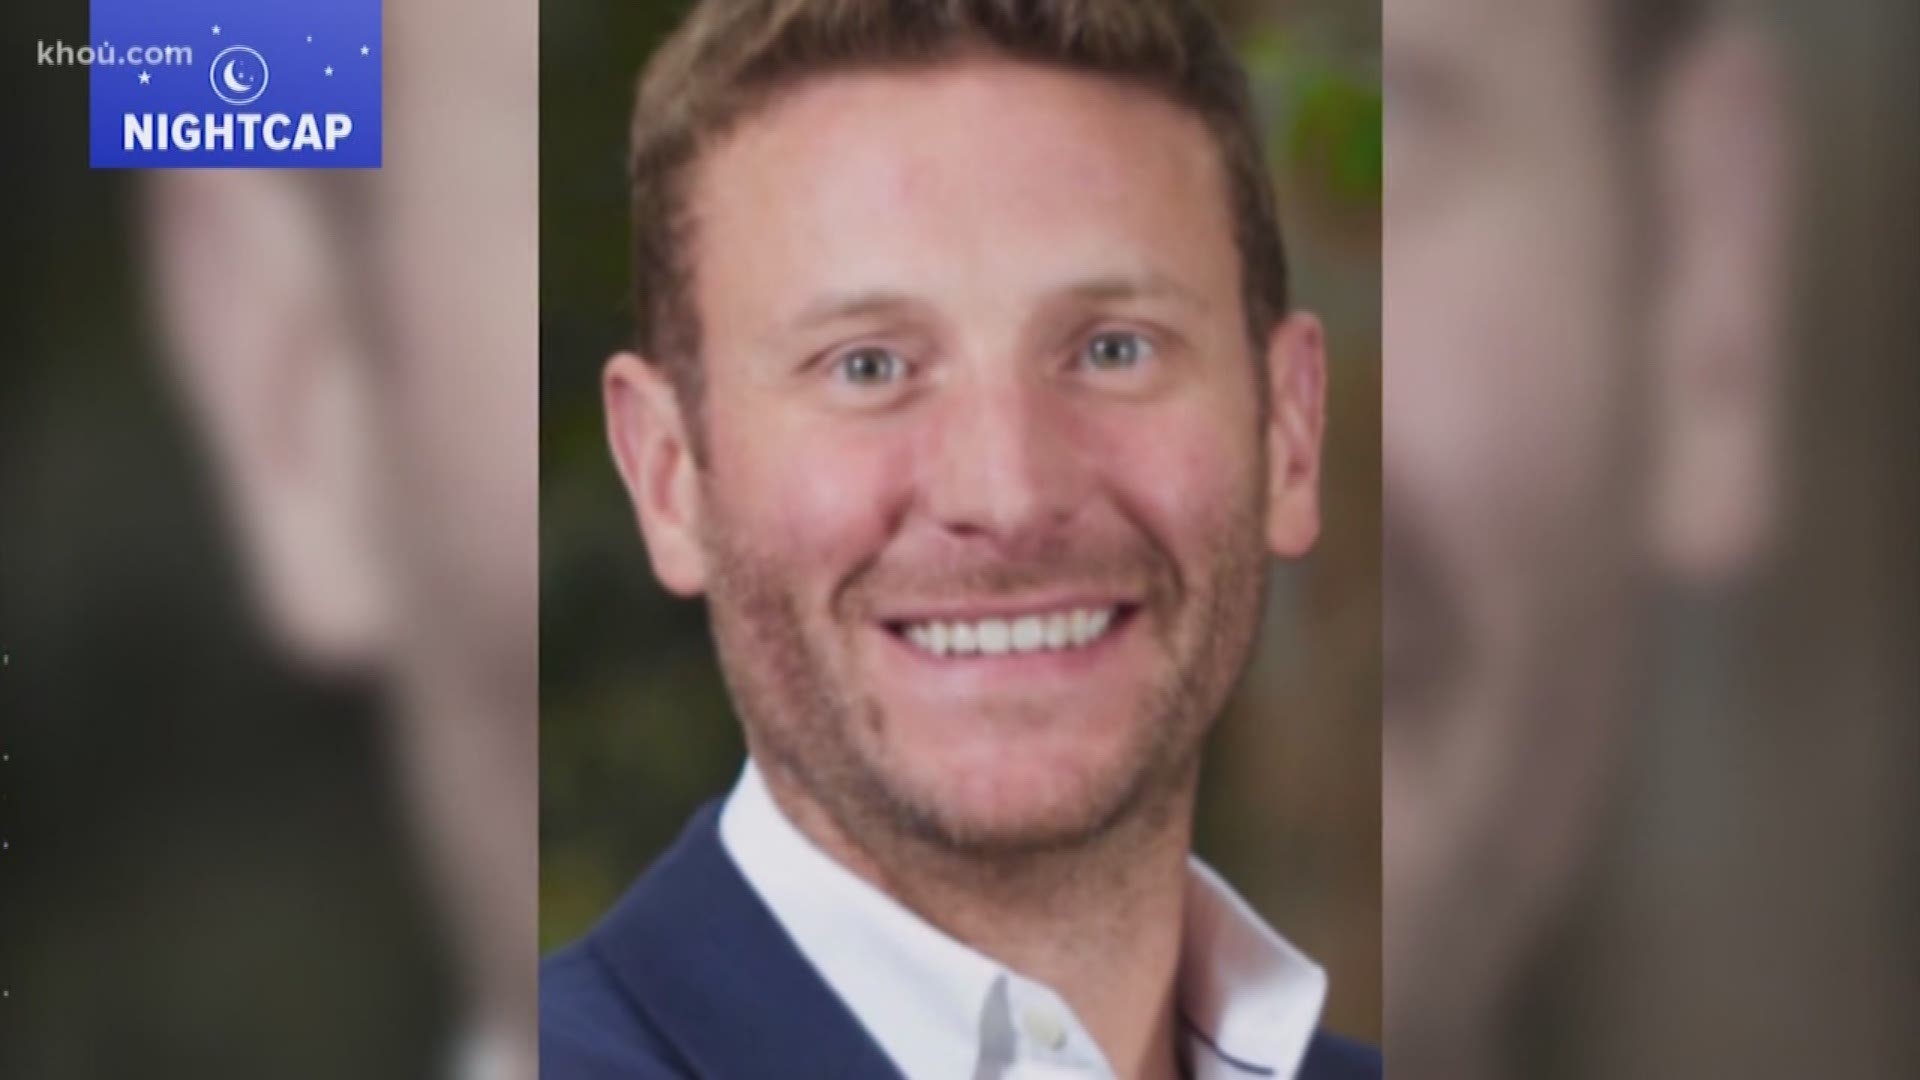 Jason Spindler died in Kenya exactly one week before what would have been his 41st birthday; Three people are accused of human trafficking in Houston; Plus, City Council is spending millions to outsource recycling pickups. Those stories are just part of your nightcap in 60 seconds.